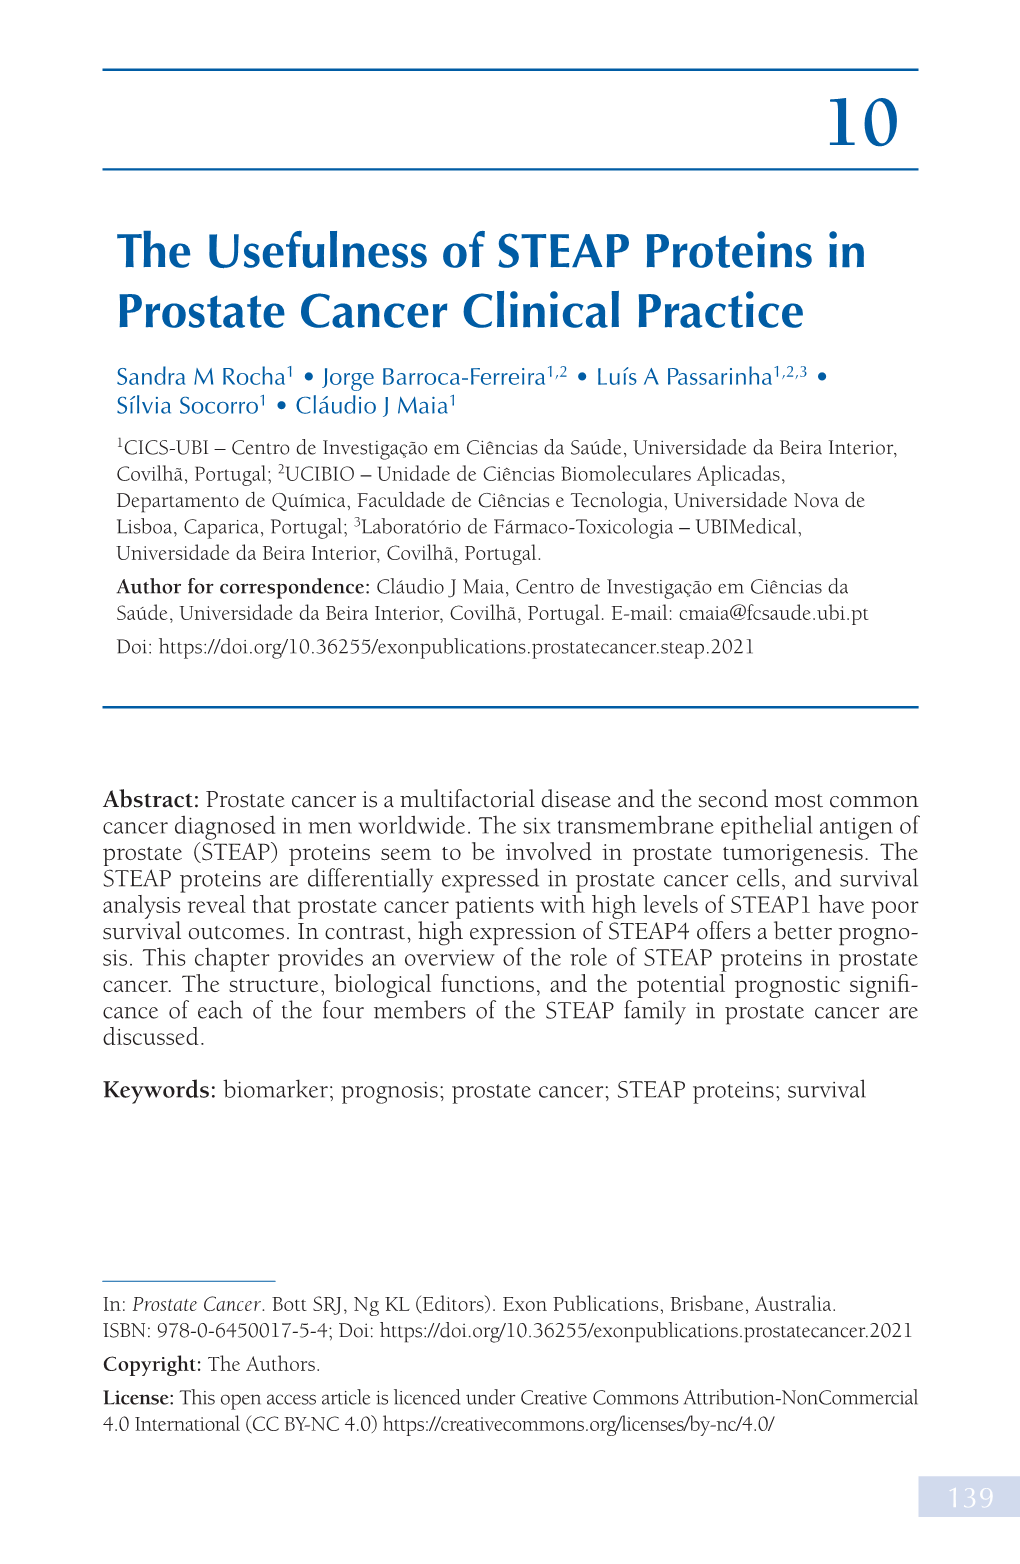 The Usefulness of STEAP Proteins in Prostate Cancer Clinical Practice